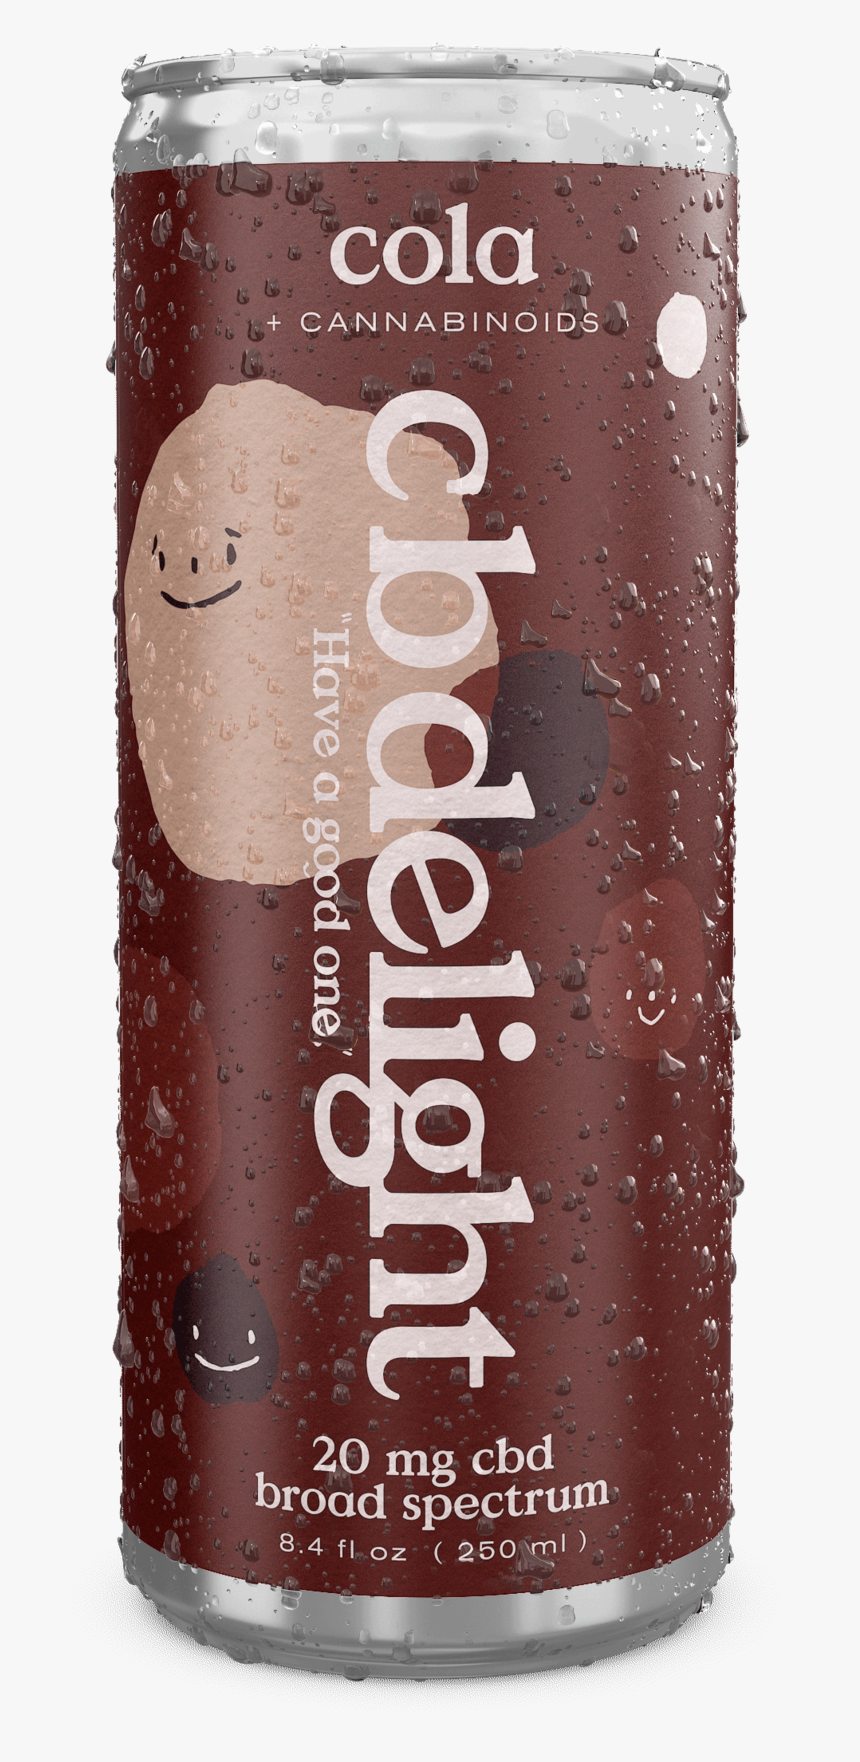 Cola-drops - Bottle, HD Png Download, Free Download